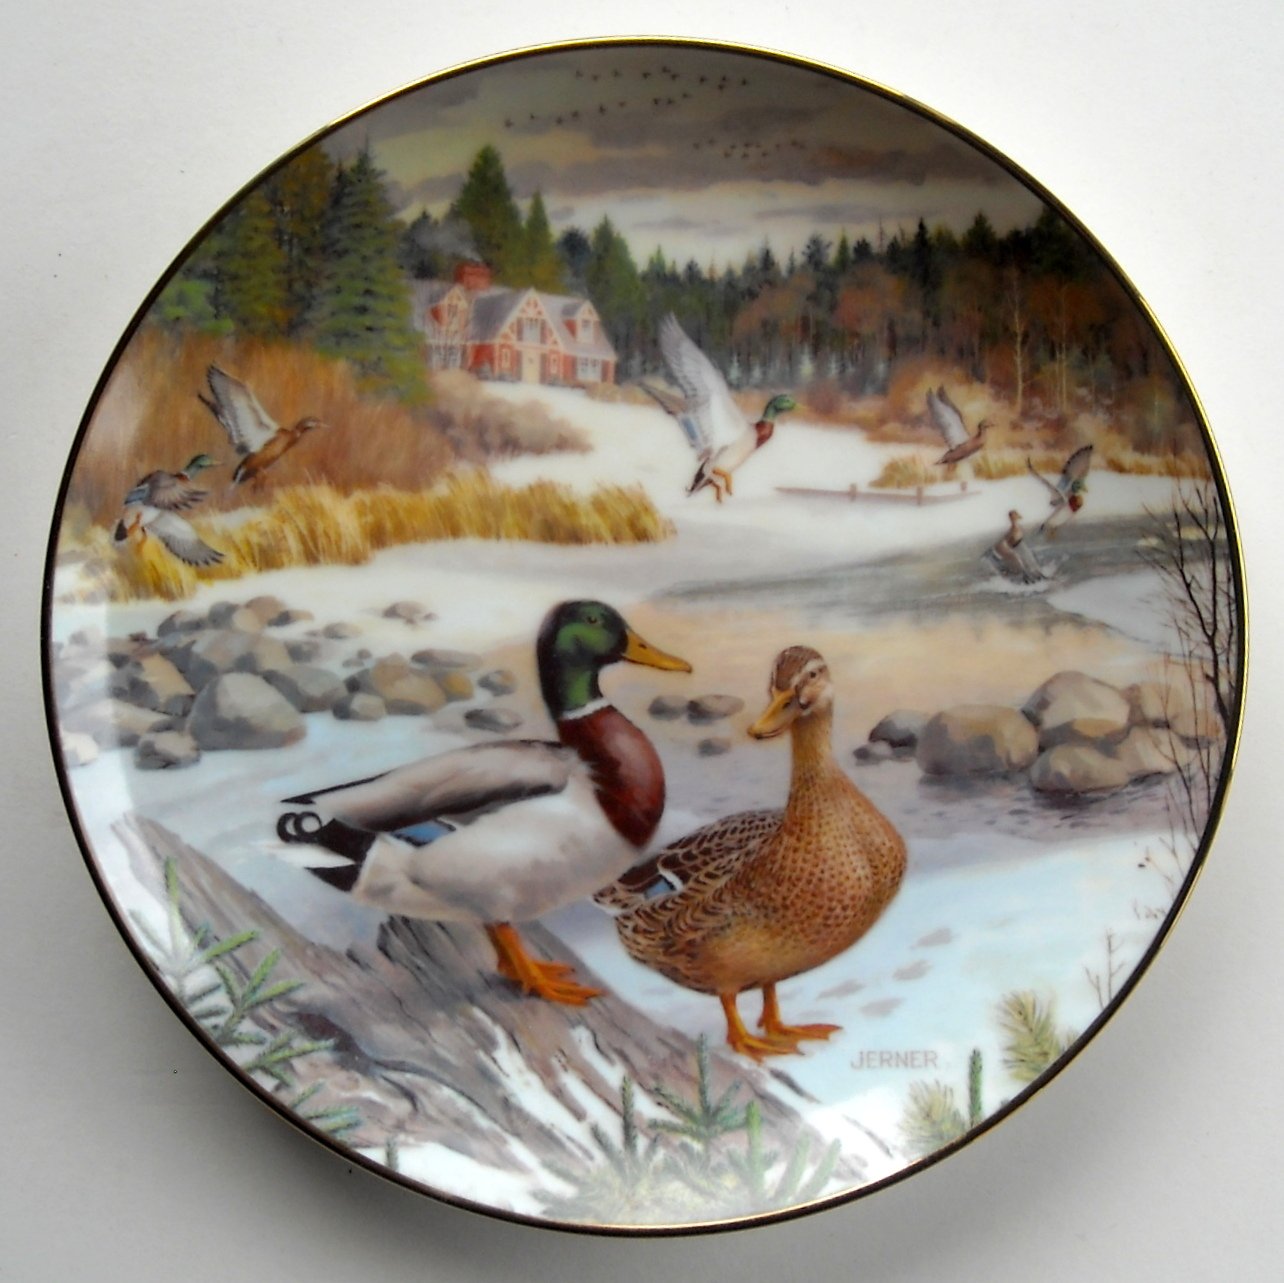 8 1/2" Diameter Barts "The Green-Winged Teal" by Bart Jerner Knowles Collector Plate 